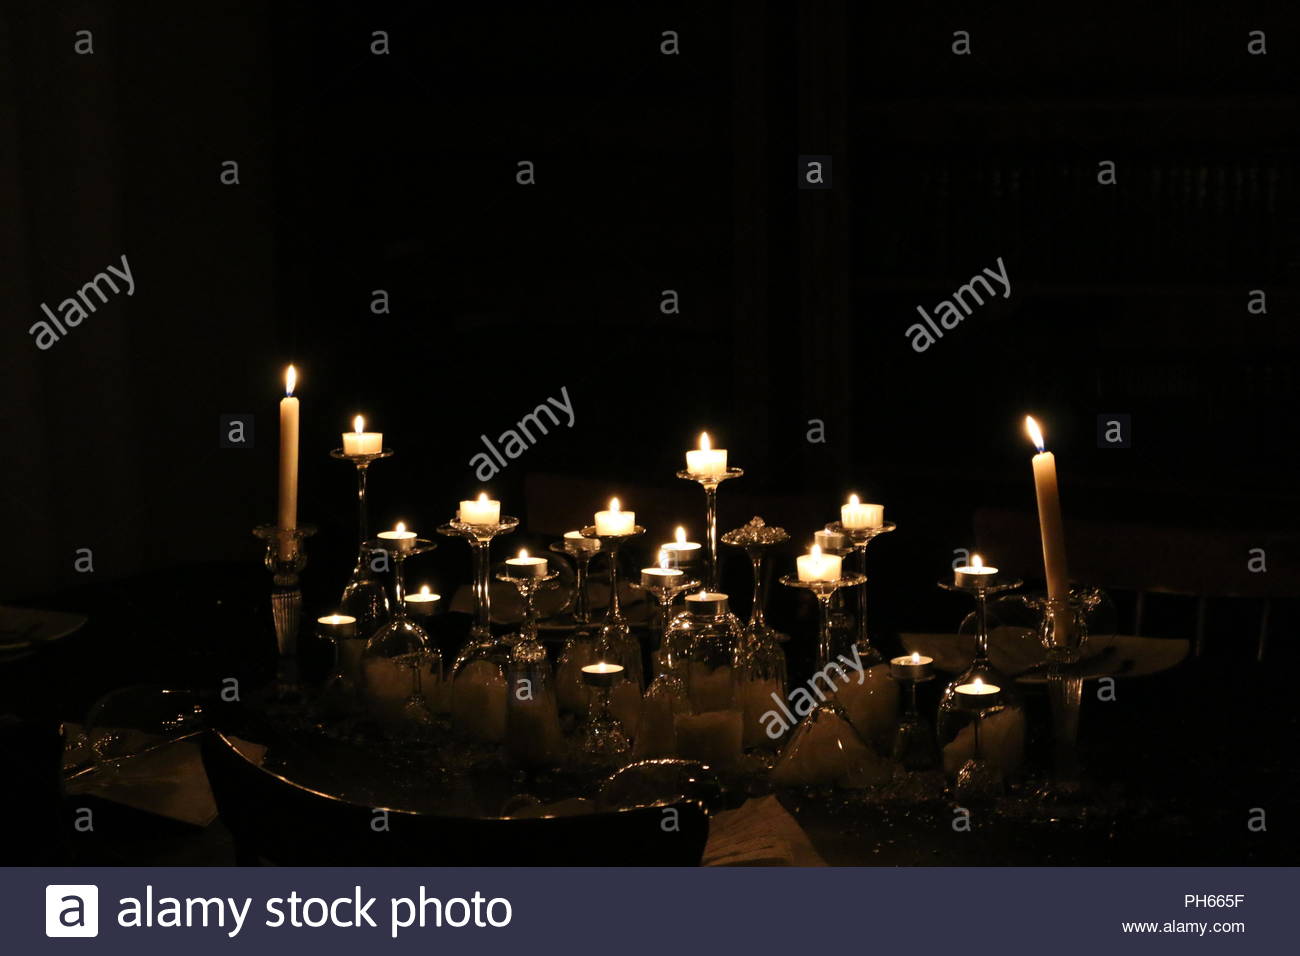 Flickering Candles High Resolution Stock Photography and Images - Alamy